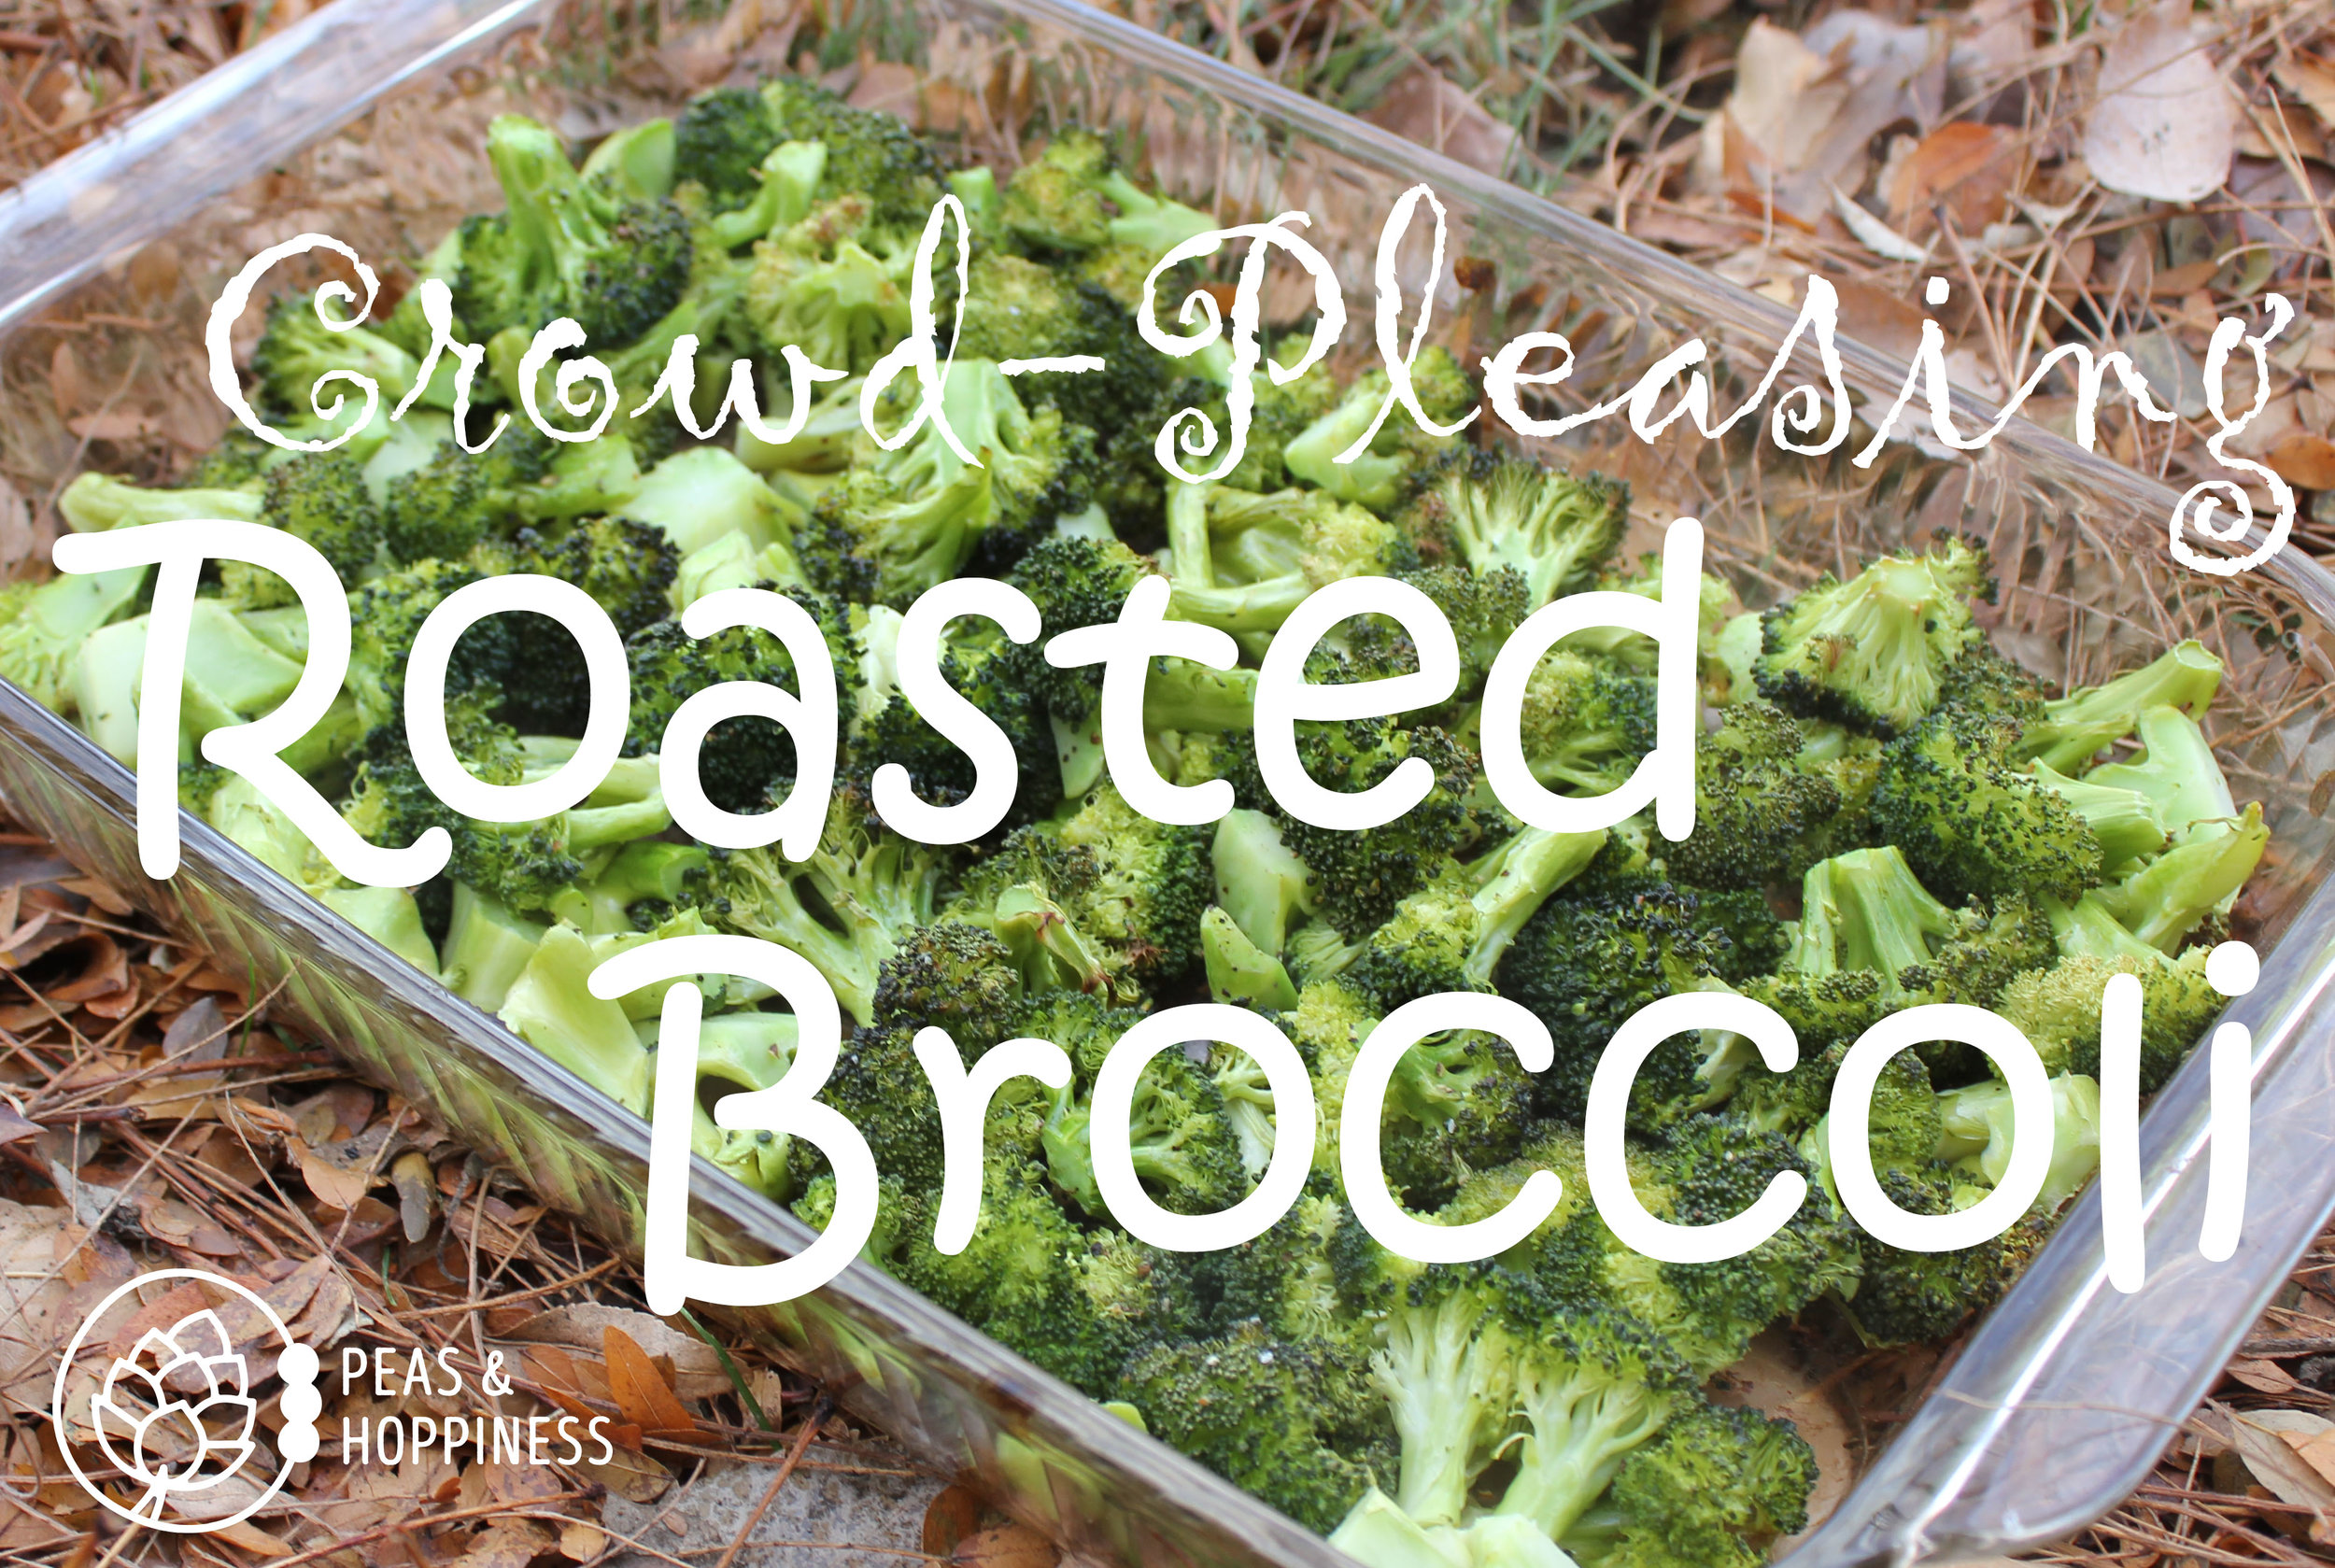 Crowd-Pleasing Roasted Broccoli from Peas and Hoppiness - www.peasandhoppiness.com